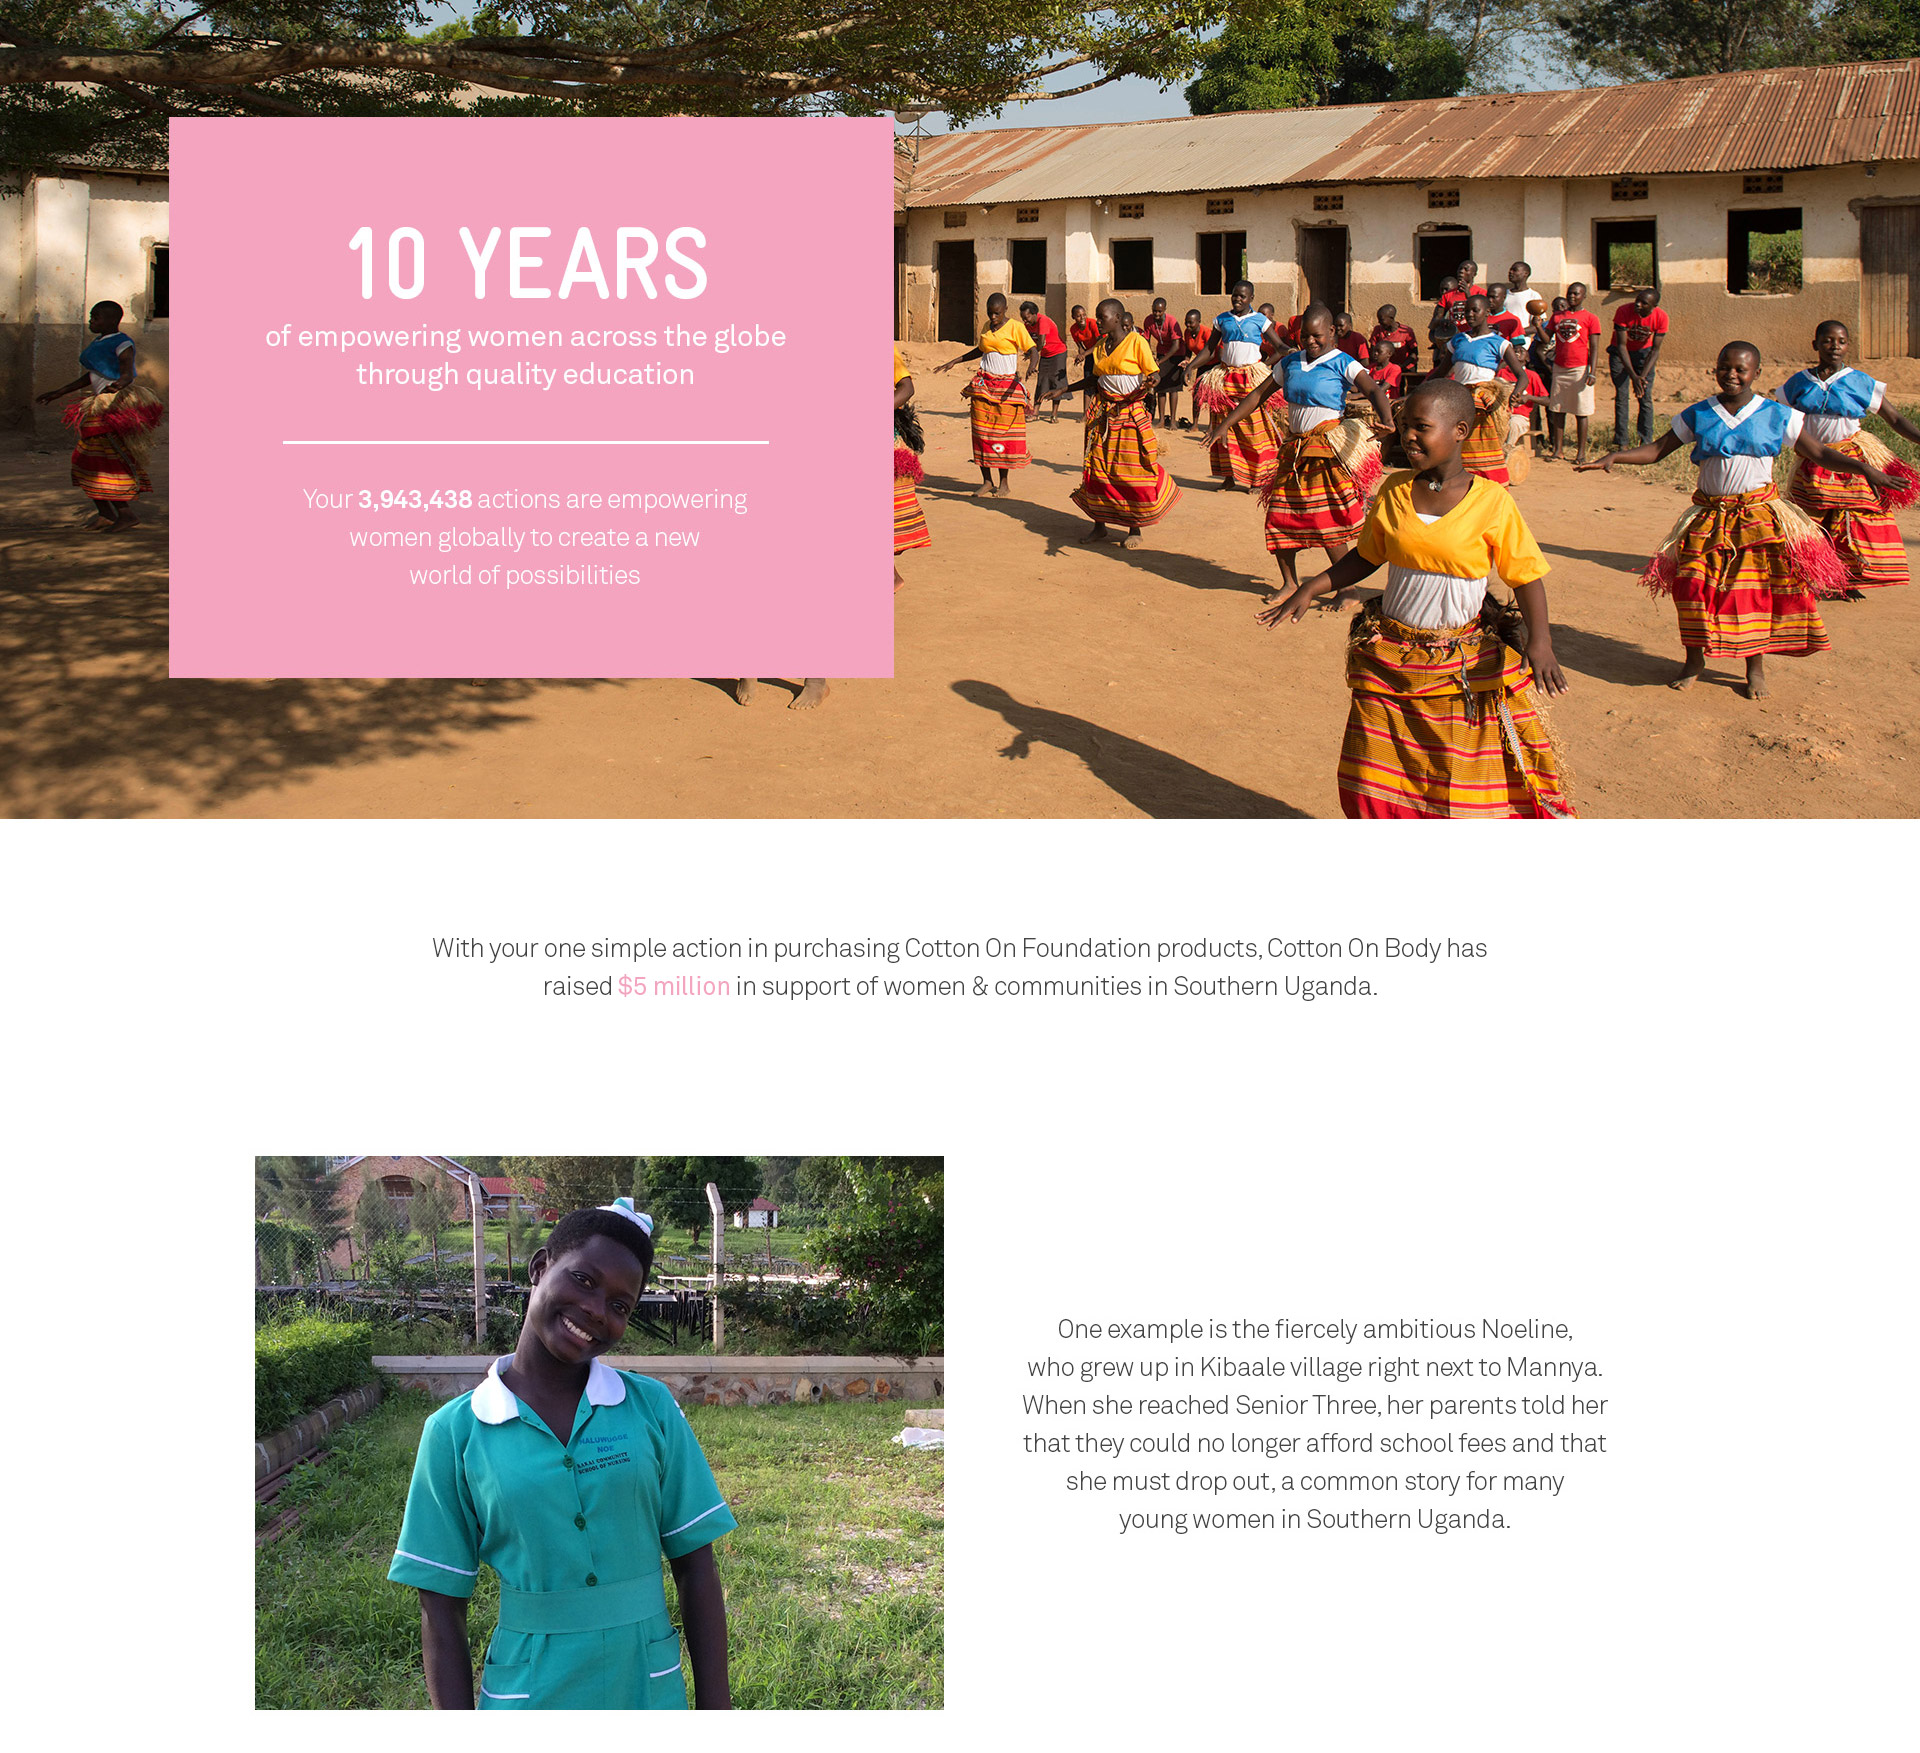 10 years of empowering women across the globe through quality education. With your simple action in purchasing Cotton On Foundation products, Cotton On Body has raised $5 million in support of women & communities in Southern Uganda.